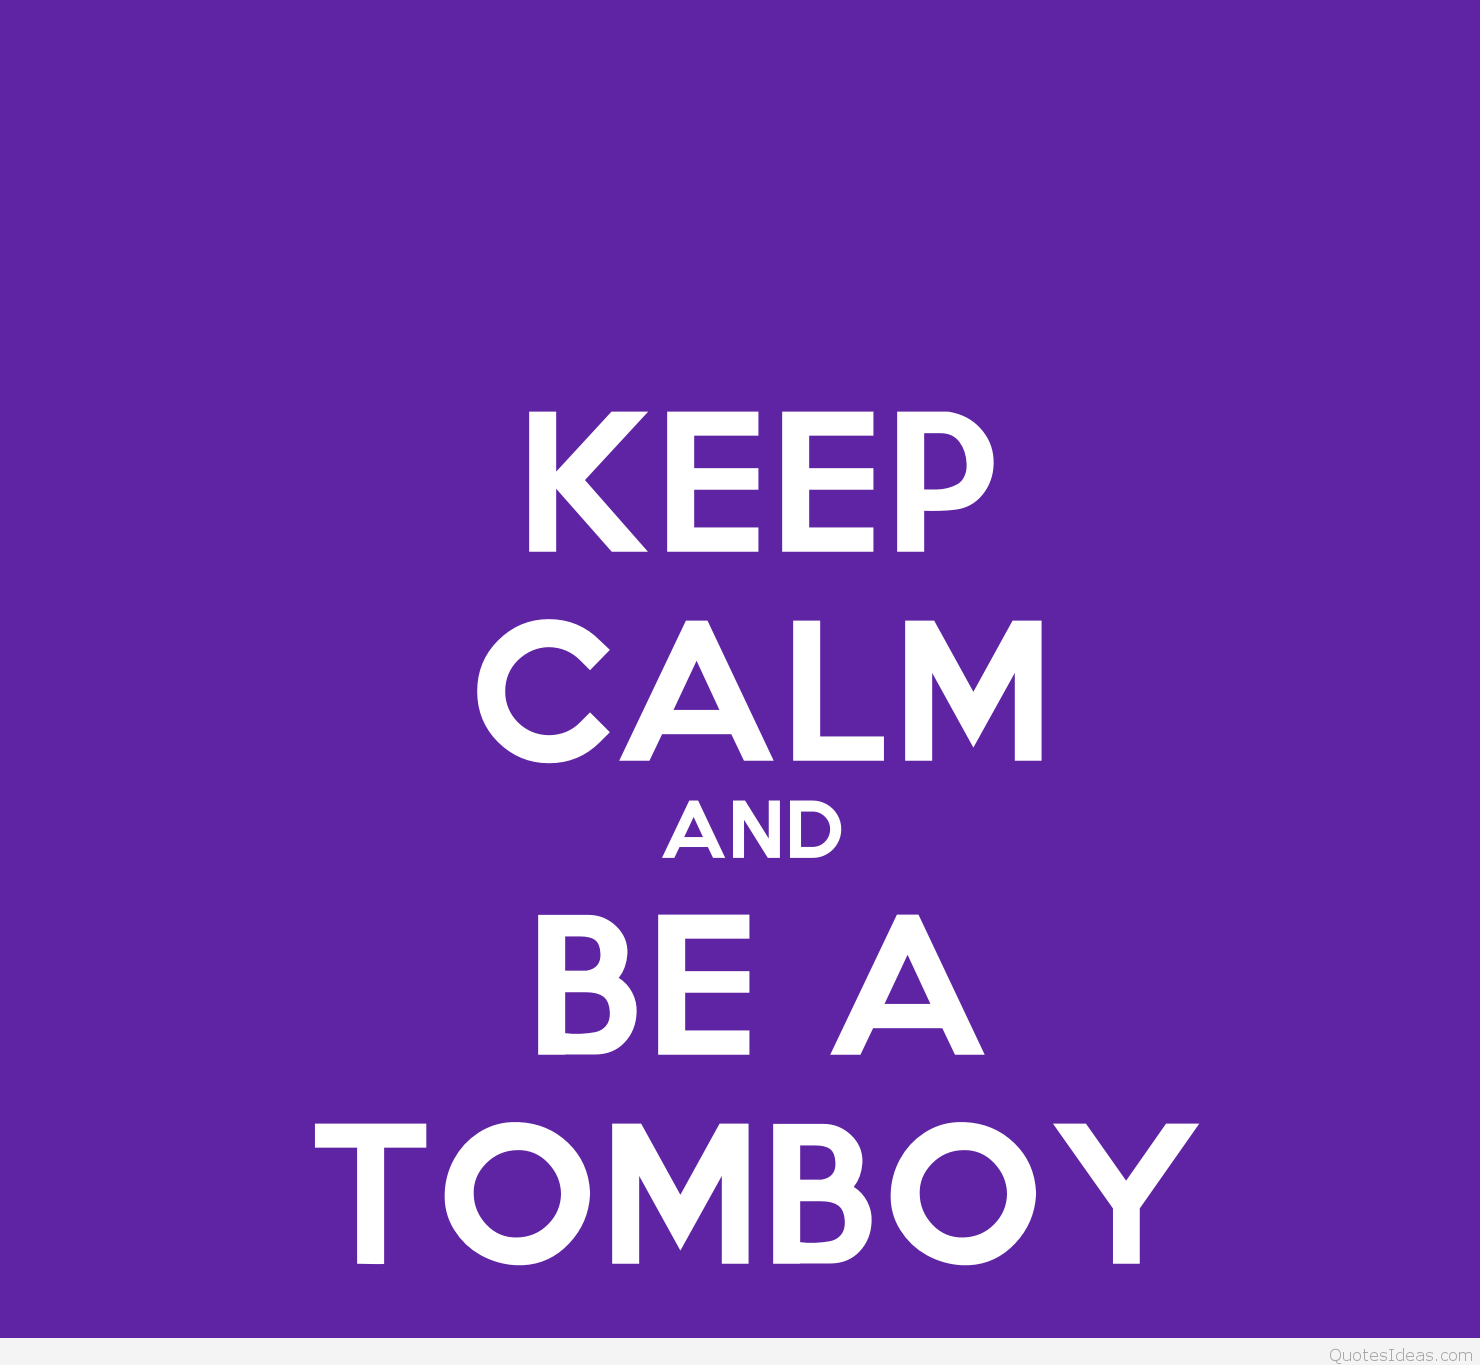 Awesome Collection Tomboy Wallpaper HD Widescreen